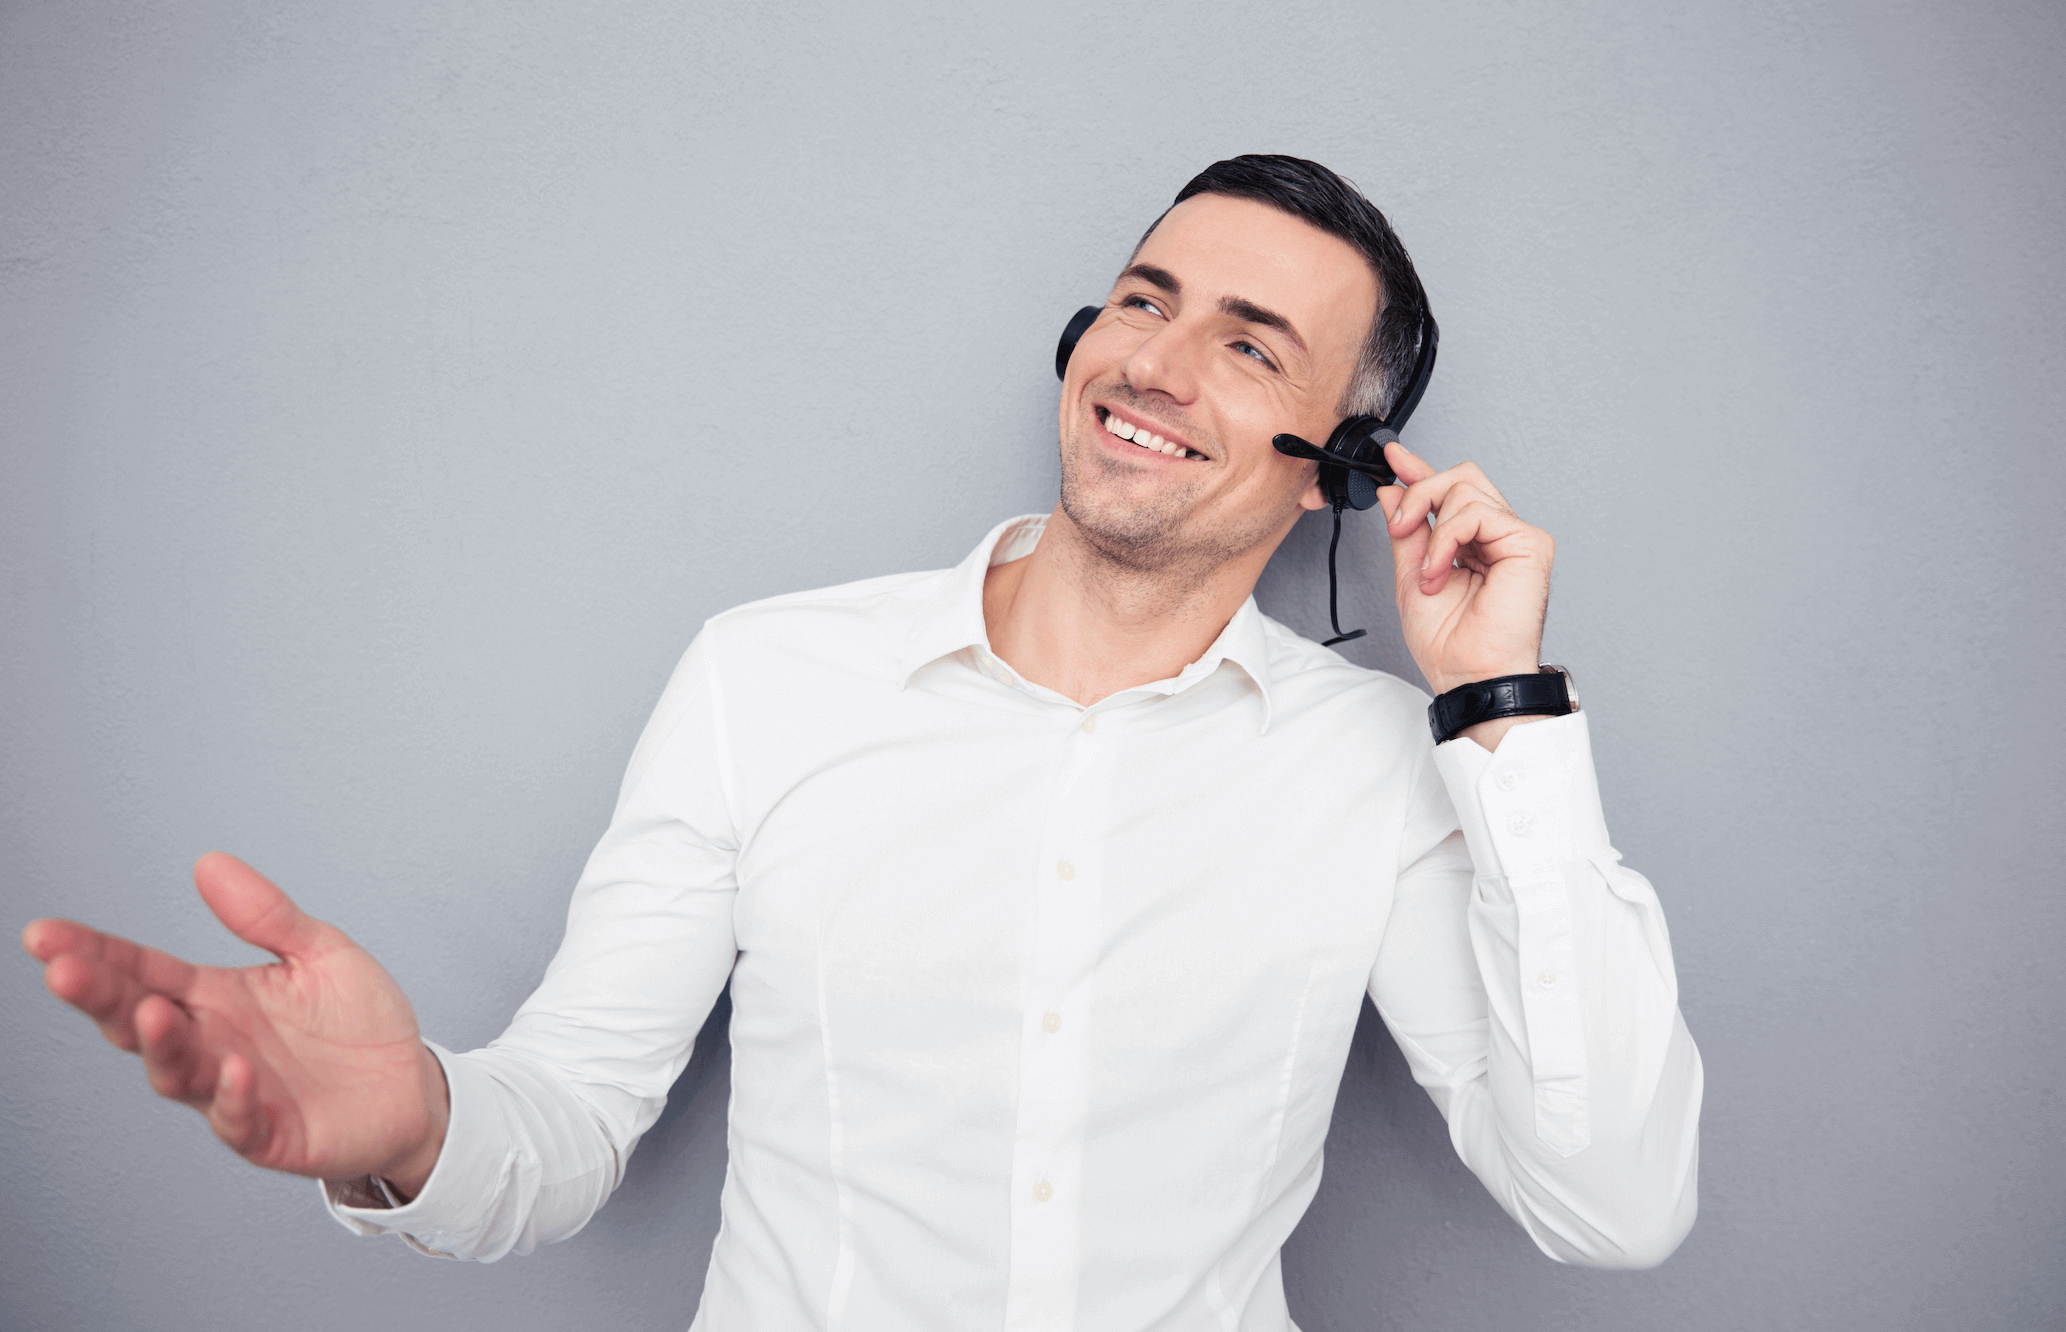 How To Get The Most Out Of Your Sales Calls